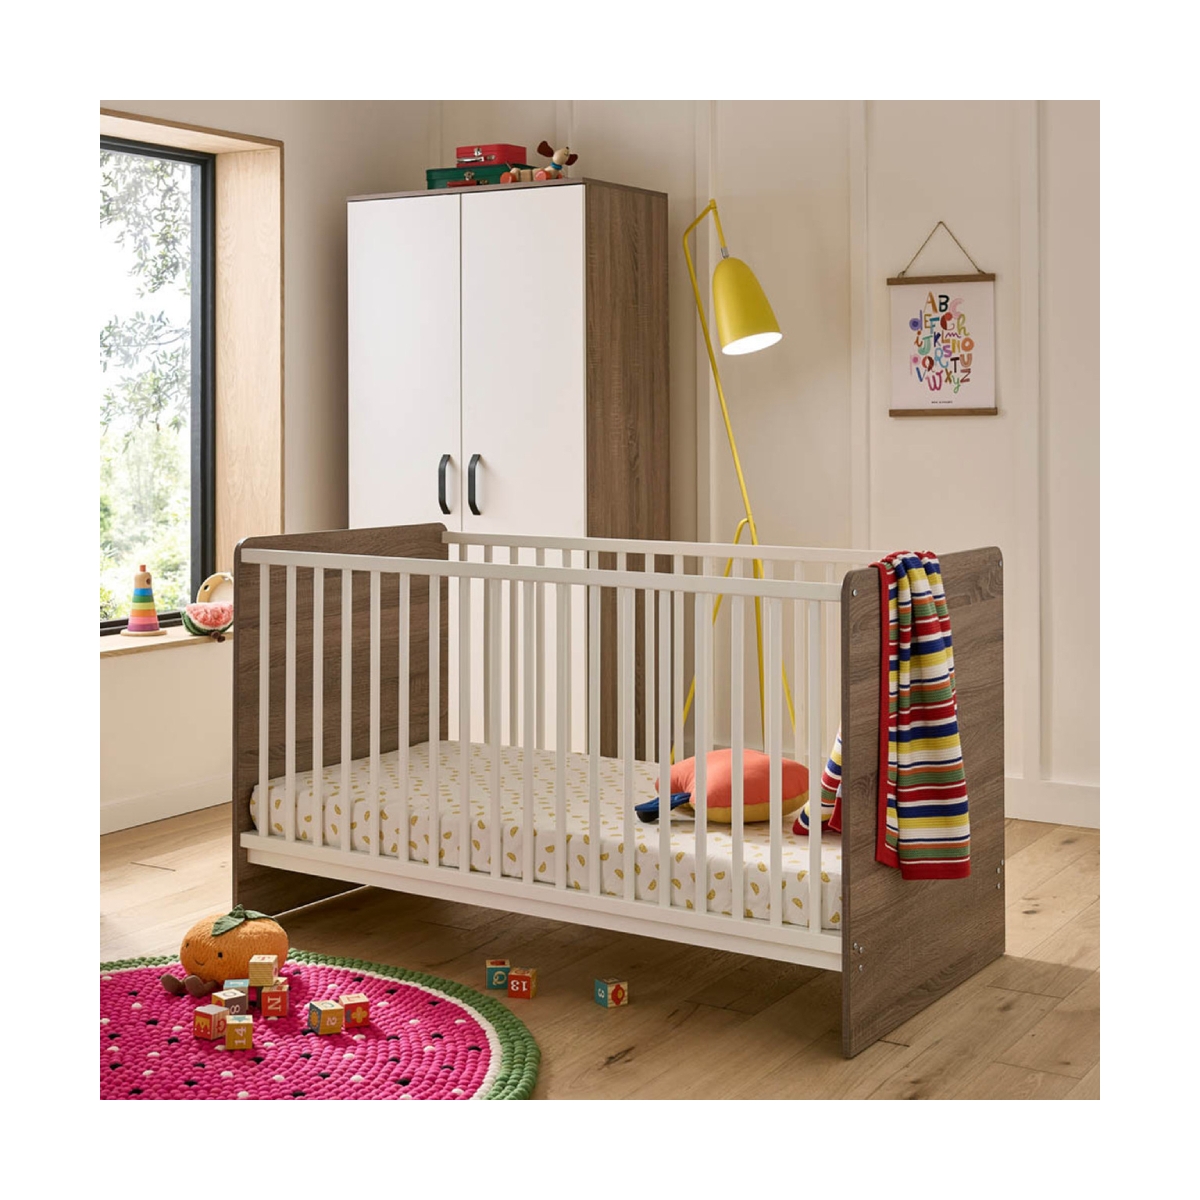 CuddleCo Enzo Cot Bed